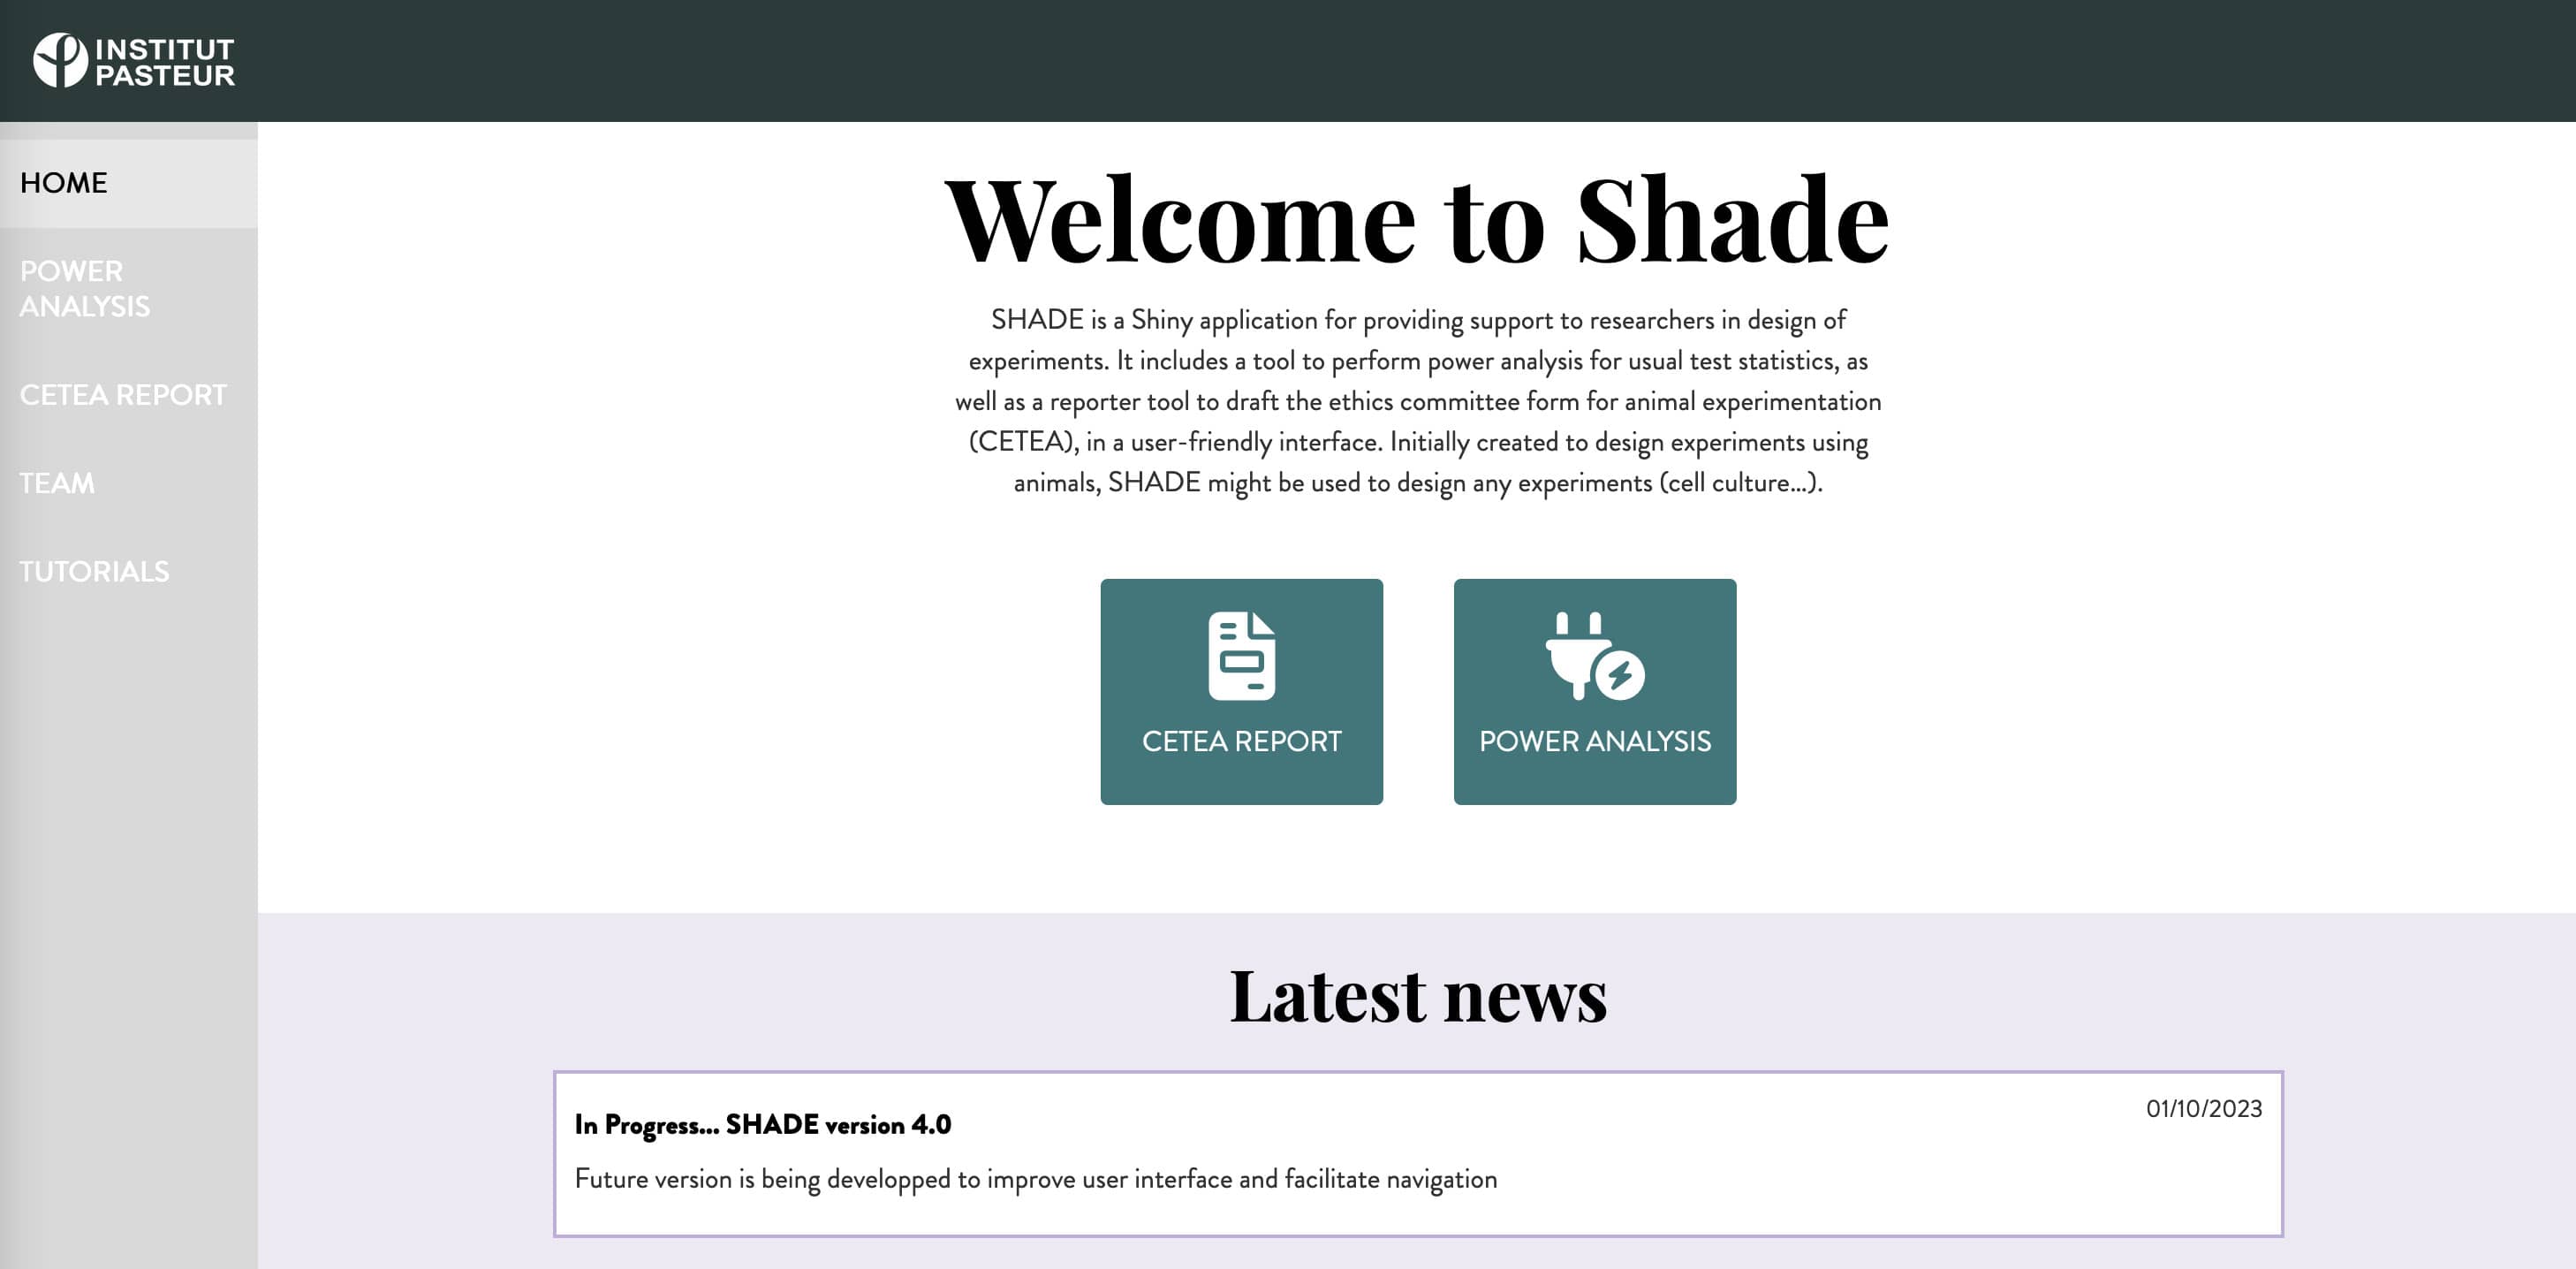  Pasteur/SHADE's new, even more user-friendly interface